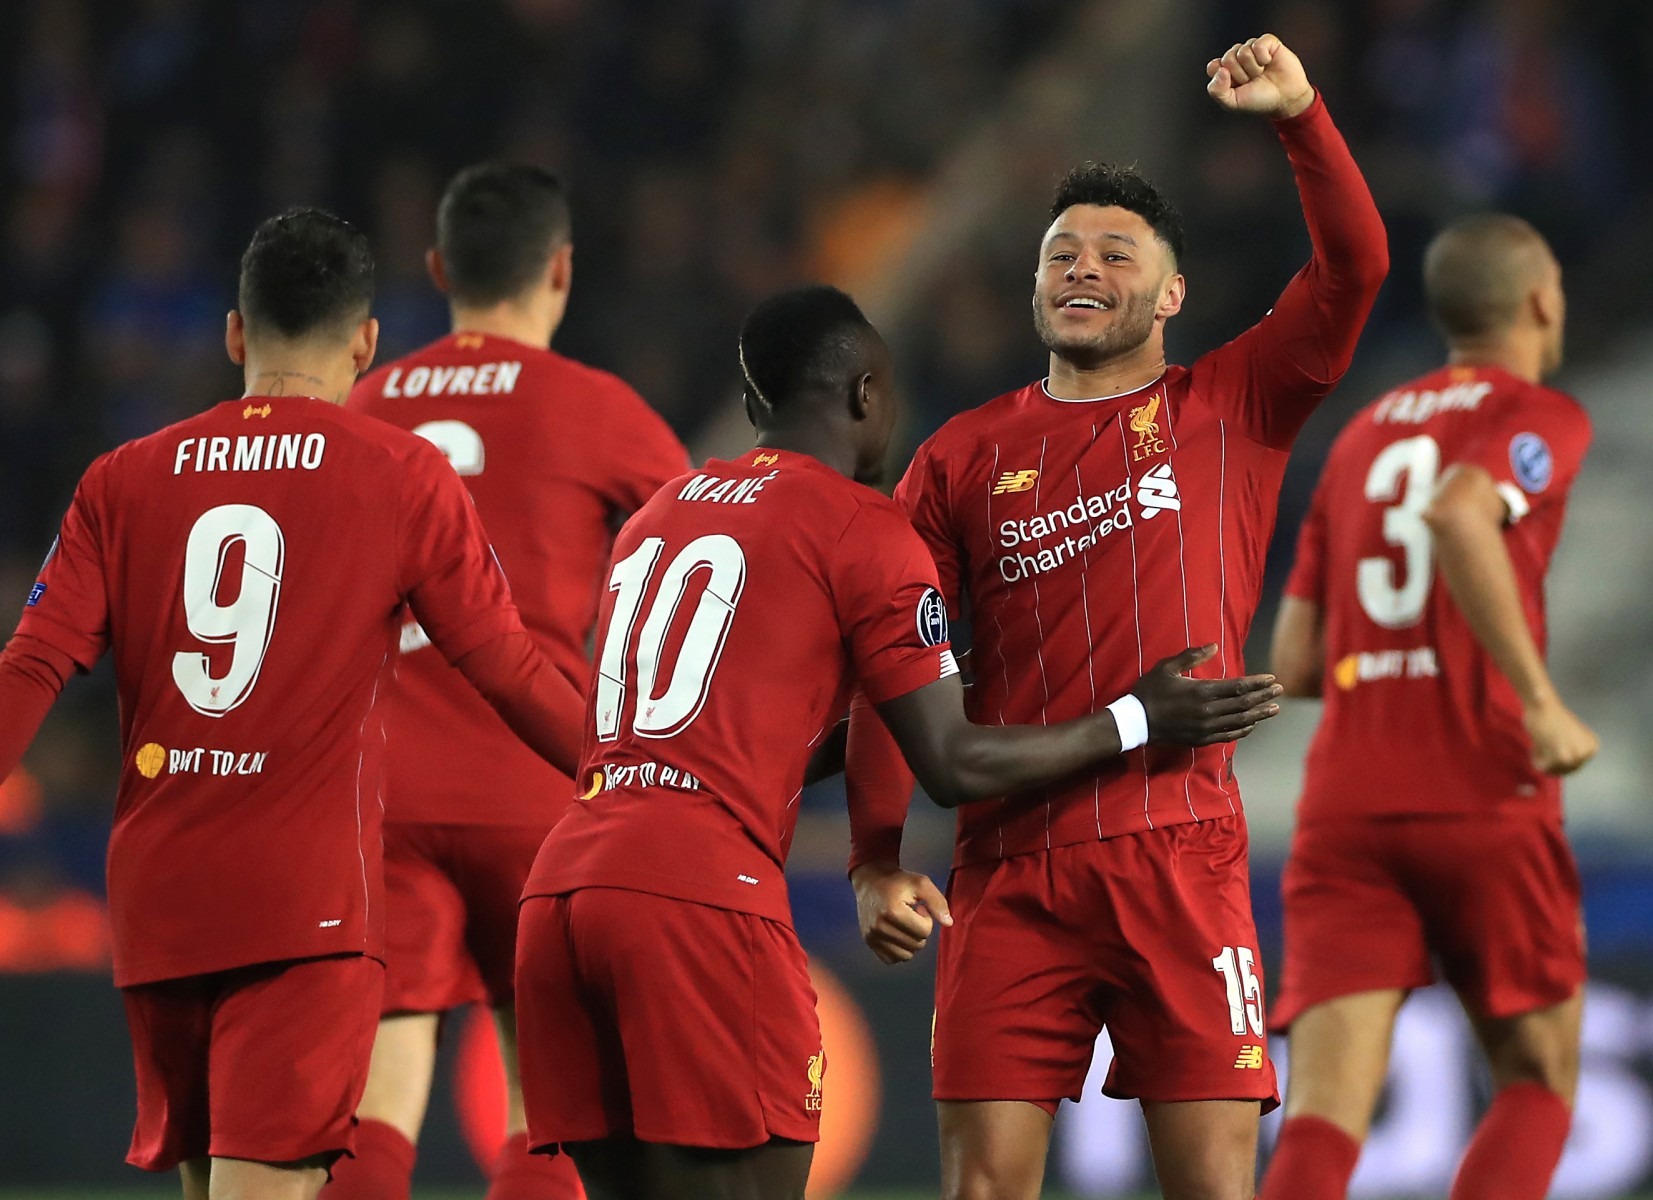 Midfielder Alex Oxlade-Chamberlain bagged the first two goals as Liverpool beat Genk 4-1 in midweek